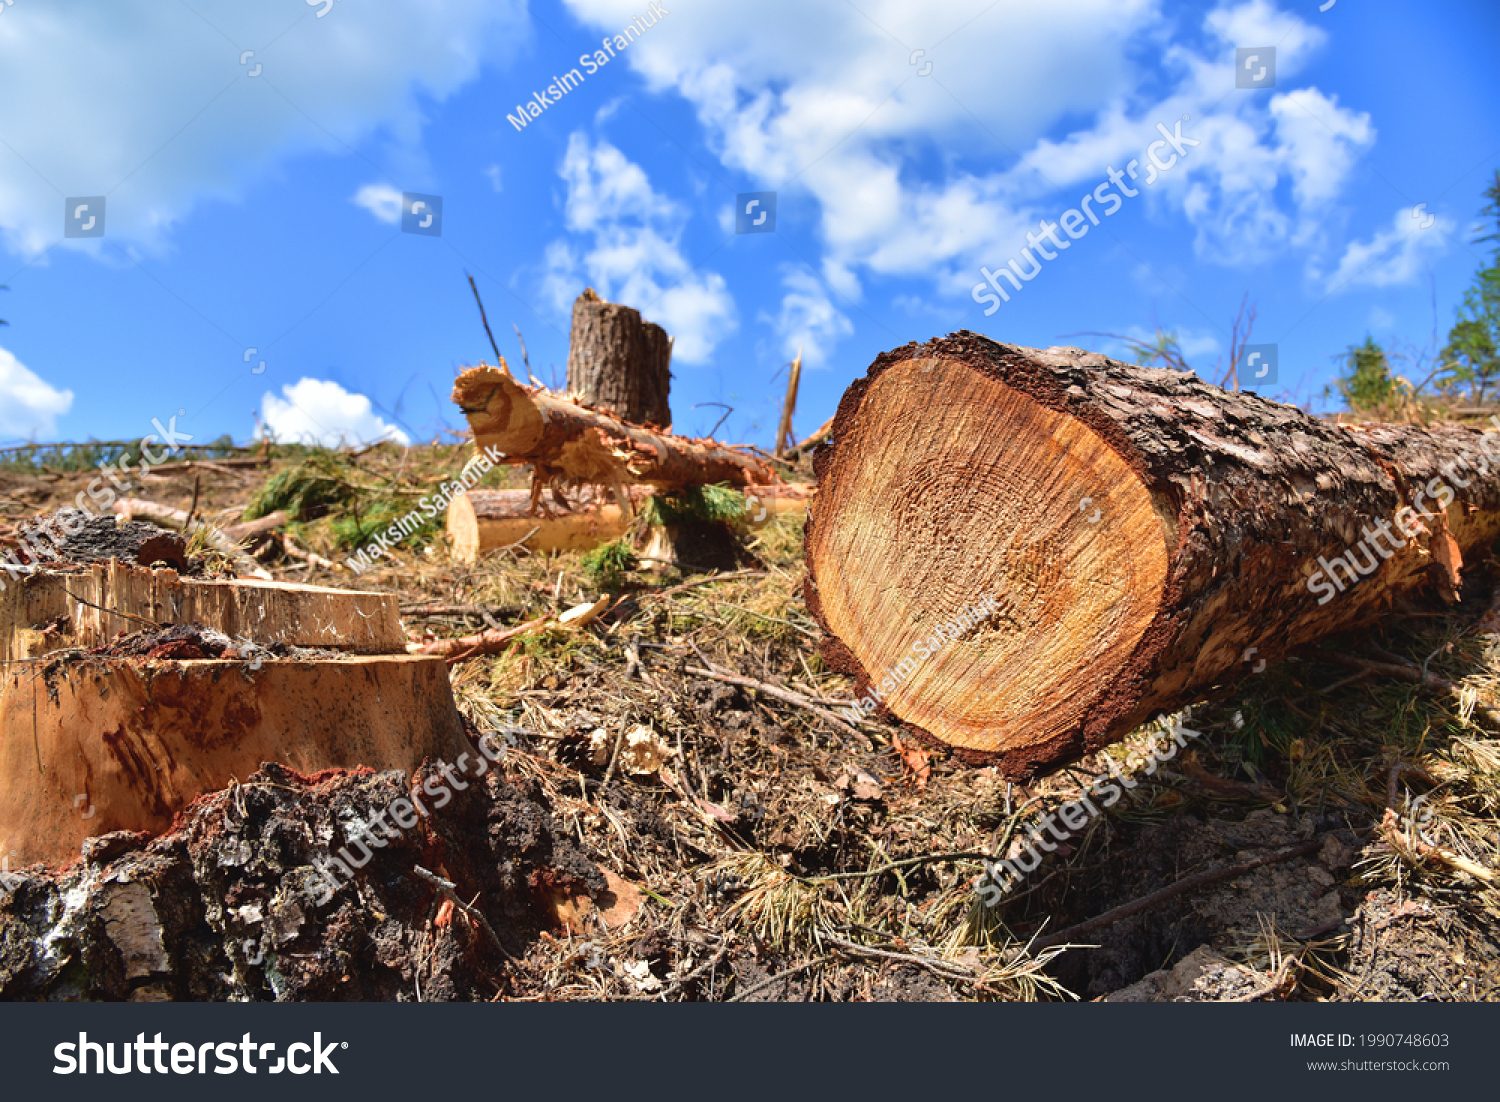 Deforestation forest and Illegal logging. Cutting trees. ​Stacks of cut wood. Wood logs, timber logging, industrial destruction. Forests illegal disappearing. Environmetal and ecological issues
 #1990748603